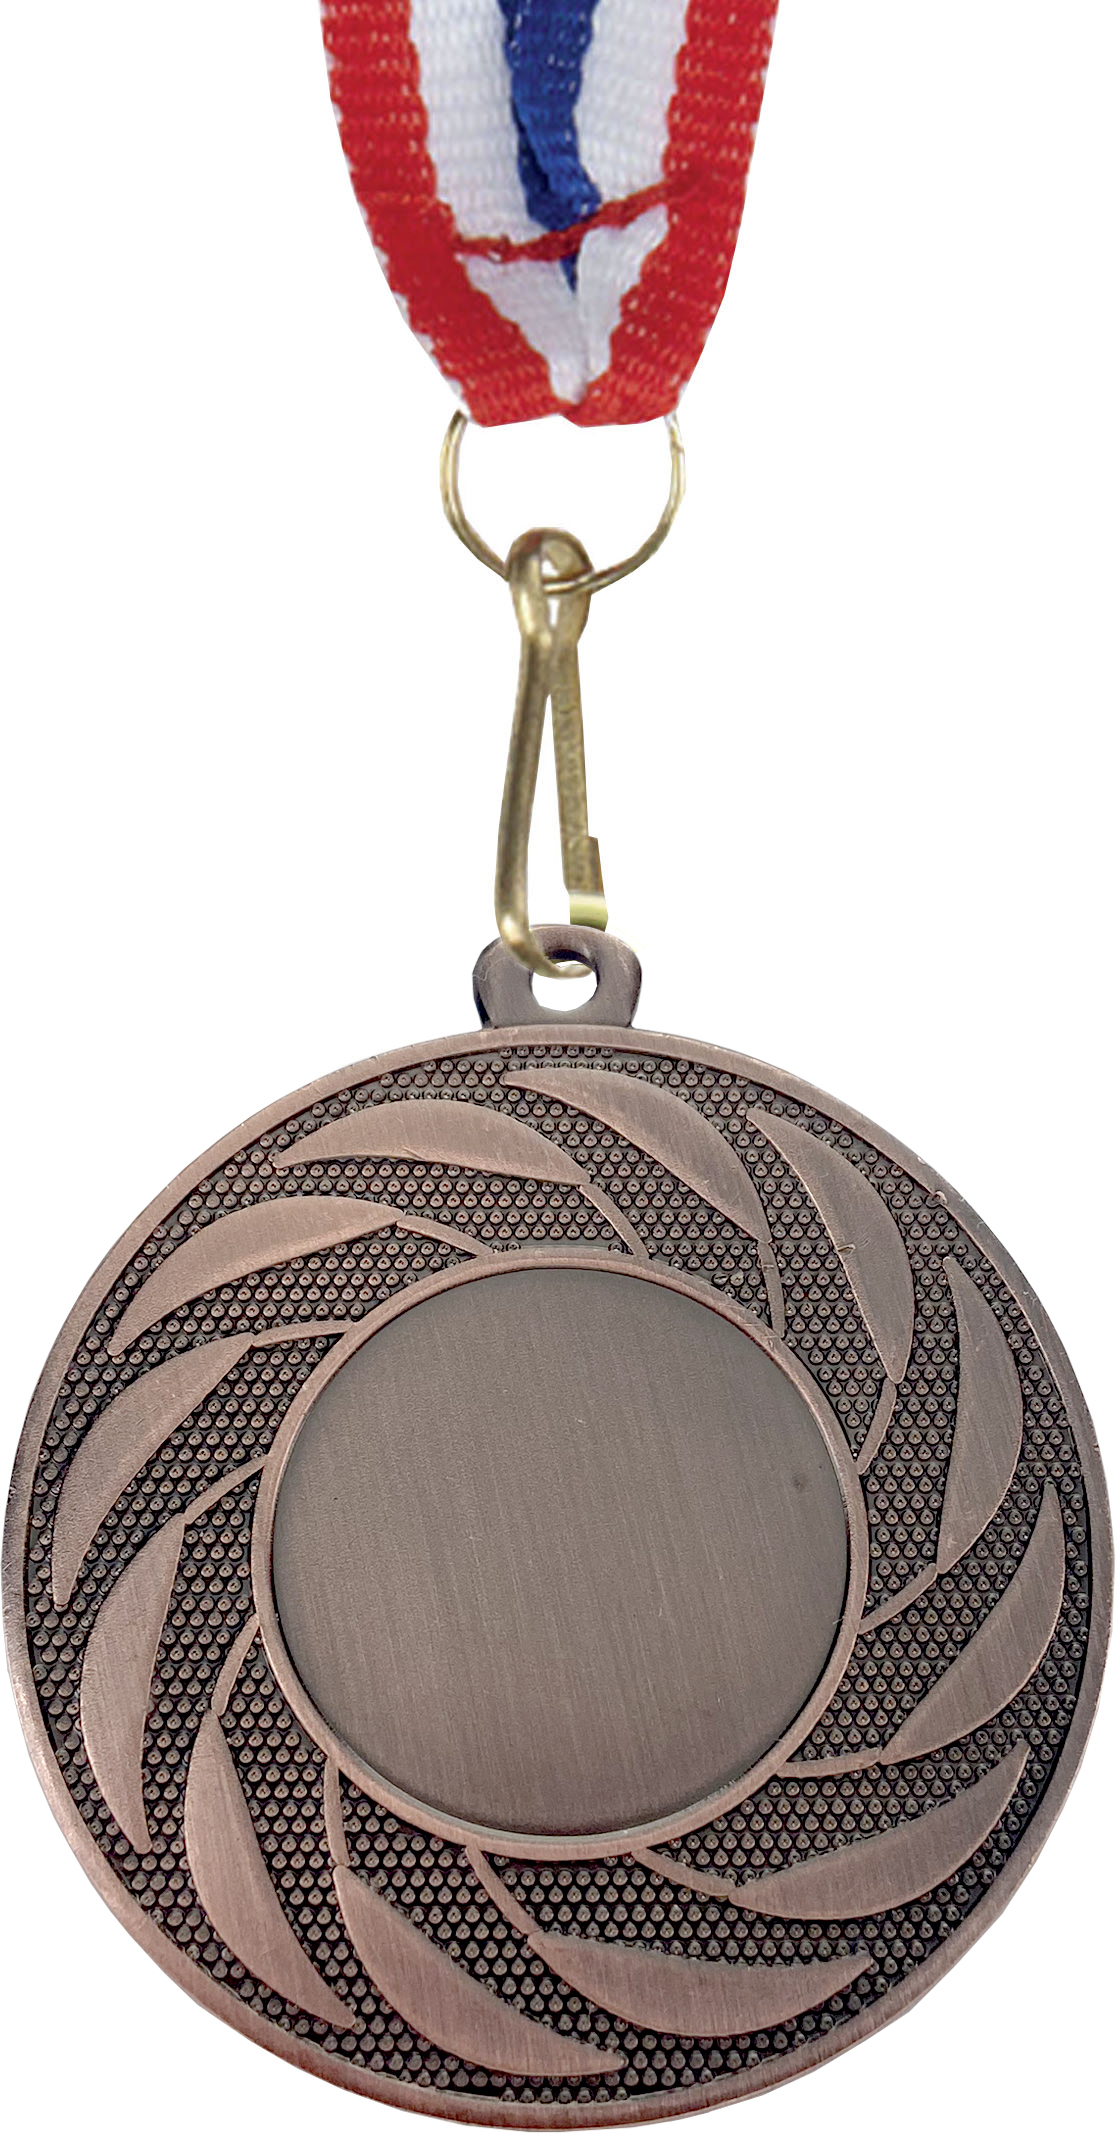 BASKETBALL METAL MEDALS x 5  50MM GOLD-SILVER OR BRONZE WITH CERTIFICATE/ RIBBON 